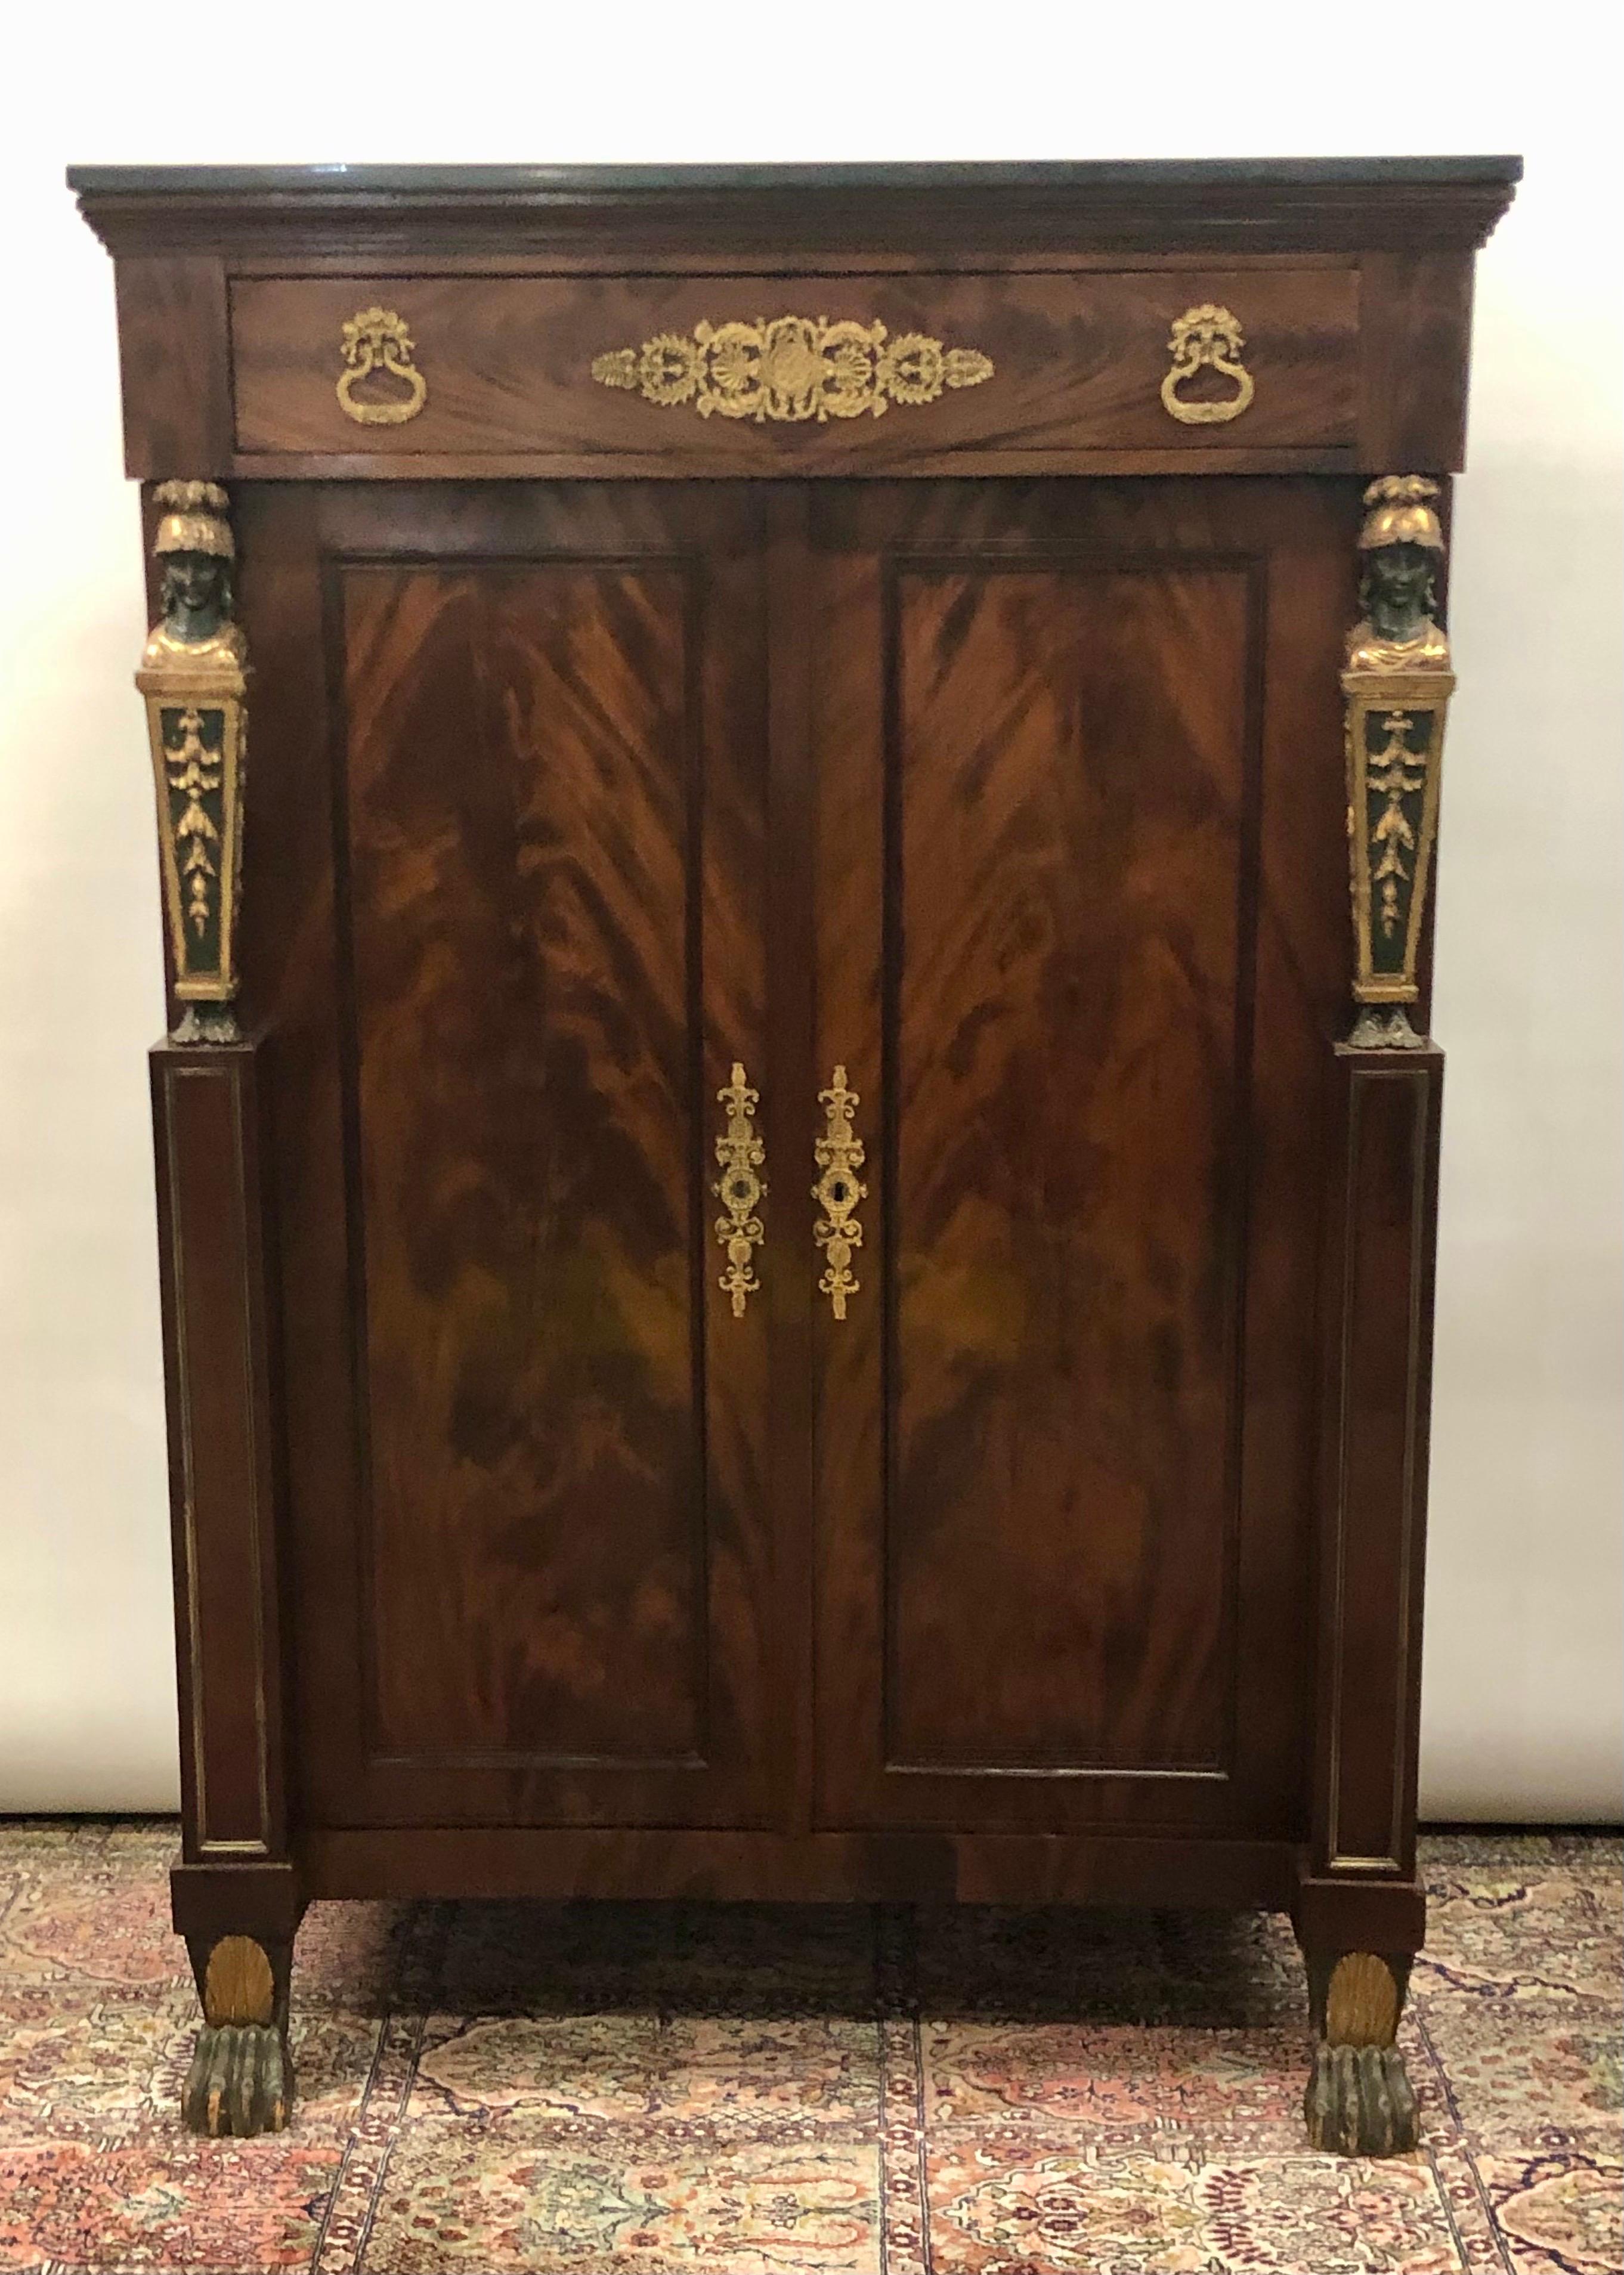 Impressive French Empire Egyptian Revival Gentleman's Cabinet / Chest with carved Caryatides Soldier Motifs on Paw Feet was made in the early 19th Century. This Elegant French Empire Gentleman's Cabinet has beautiful Flame Mahogany Veneered Wardrobe